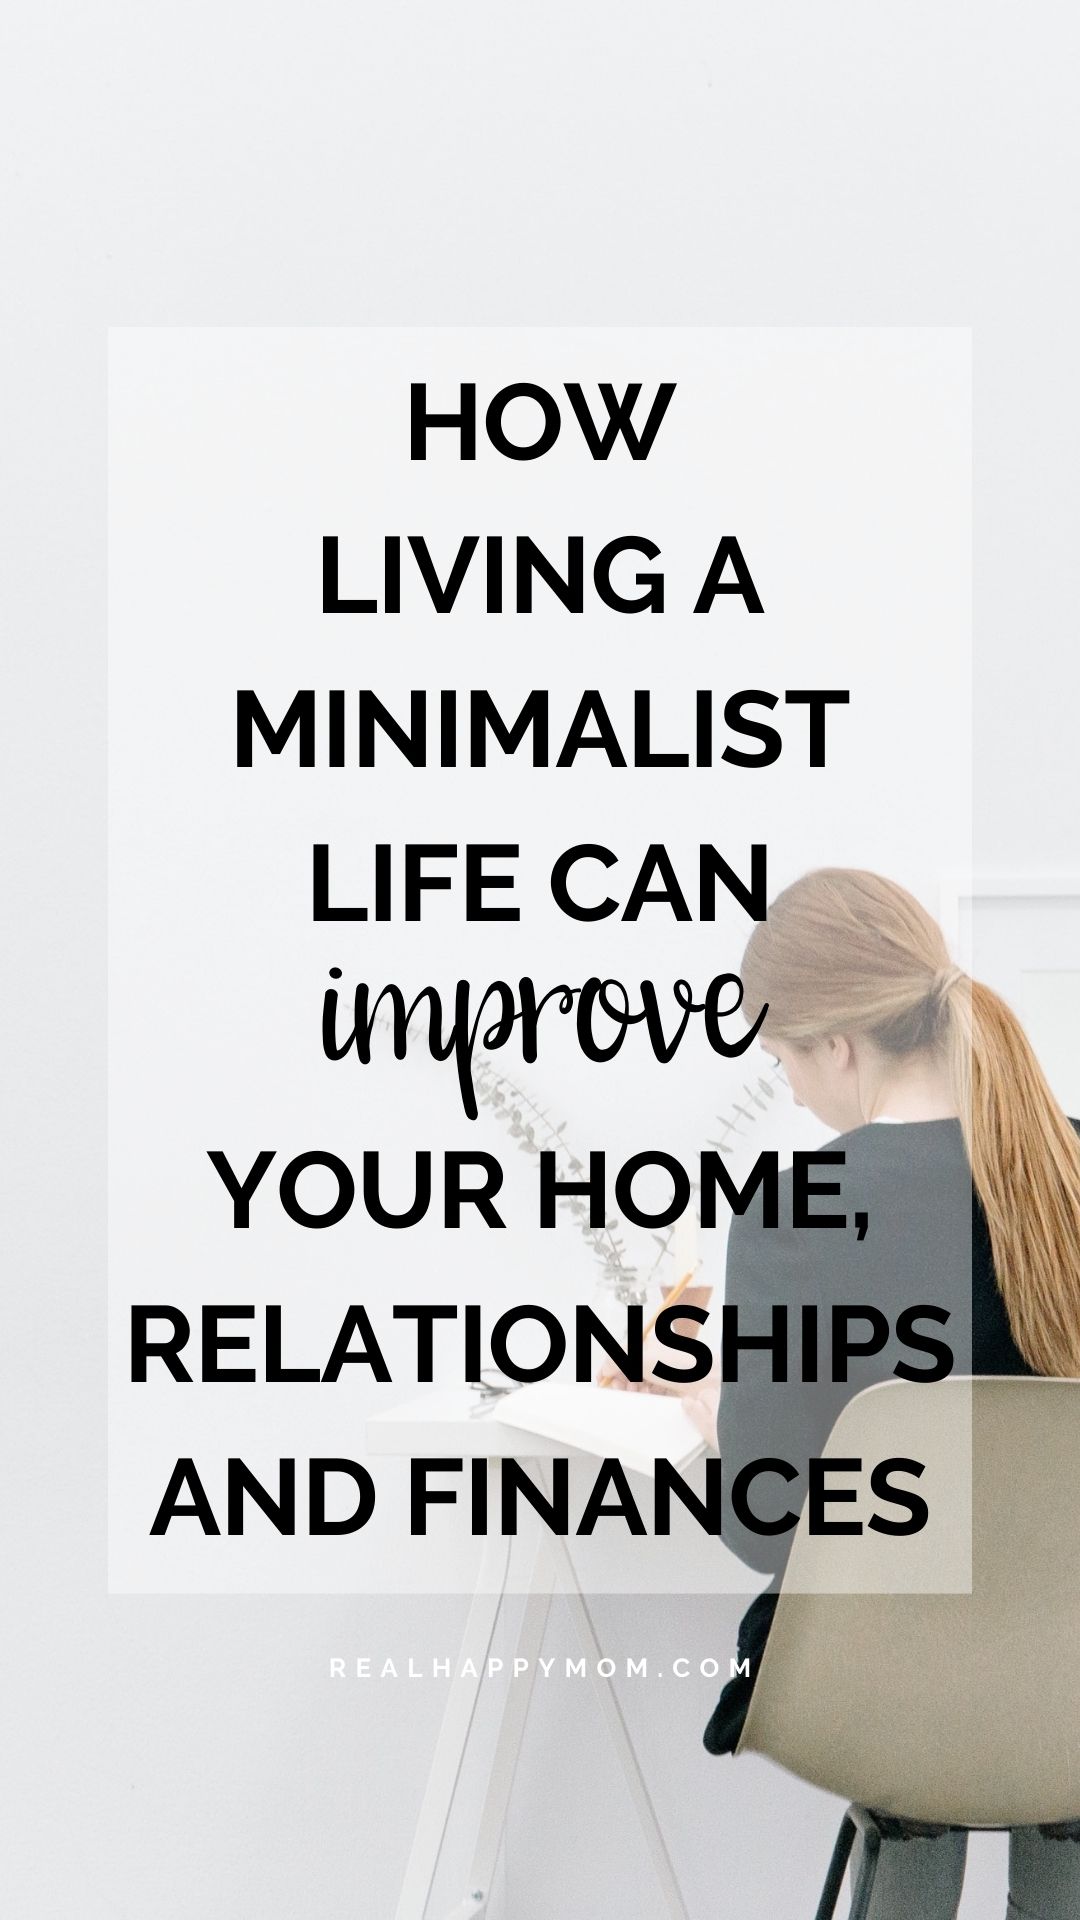 How Living a Minimalist Life Can Improve Your Home, Relationships and Finances